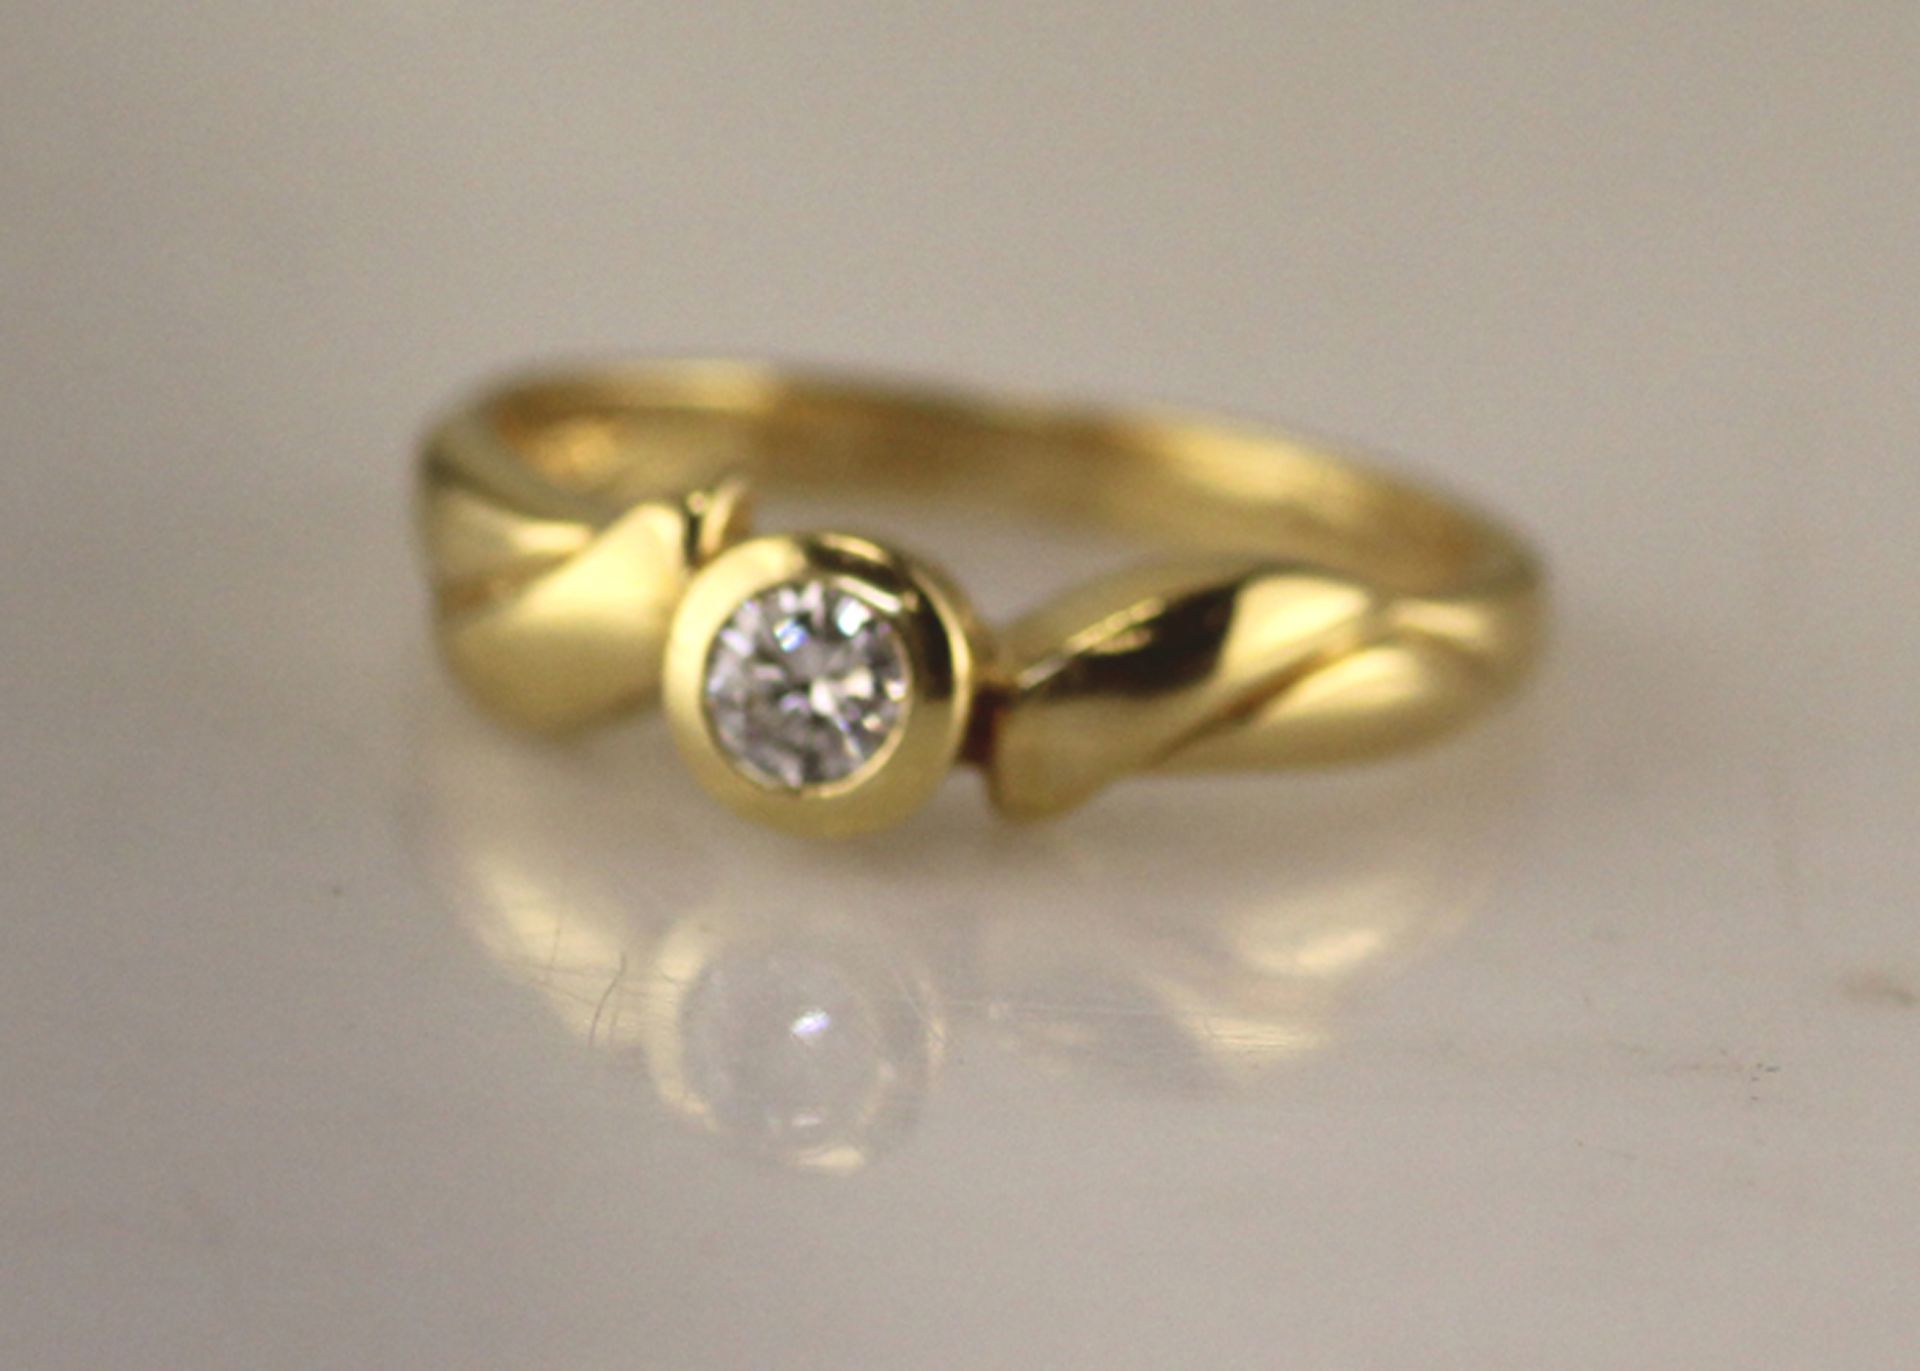 18ct Single Stone Fancy Rub Over Set Diamond Ring 0.17 Carats - Valued by GIE £6,550.00 - A - Image 5 of 8